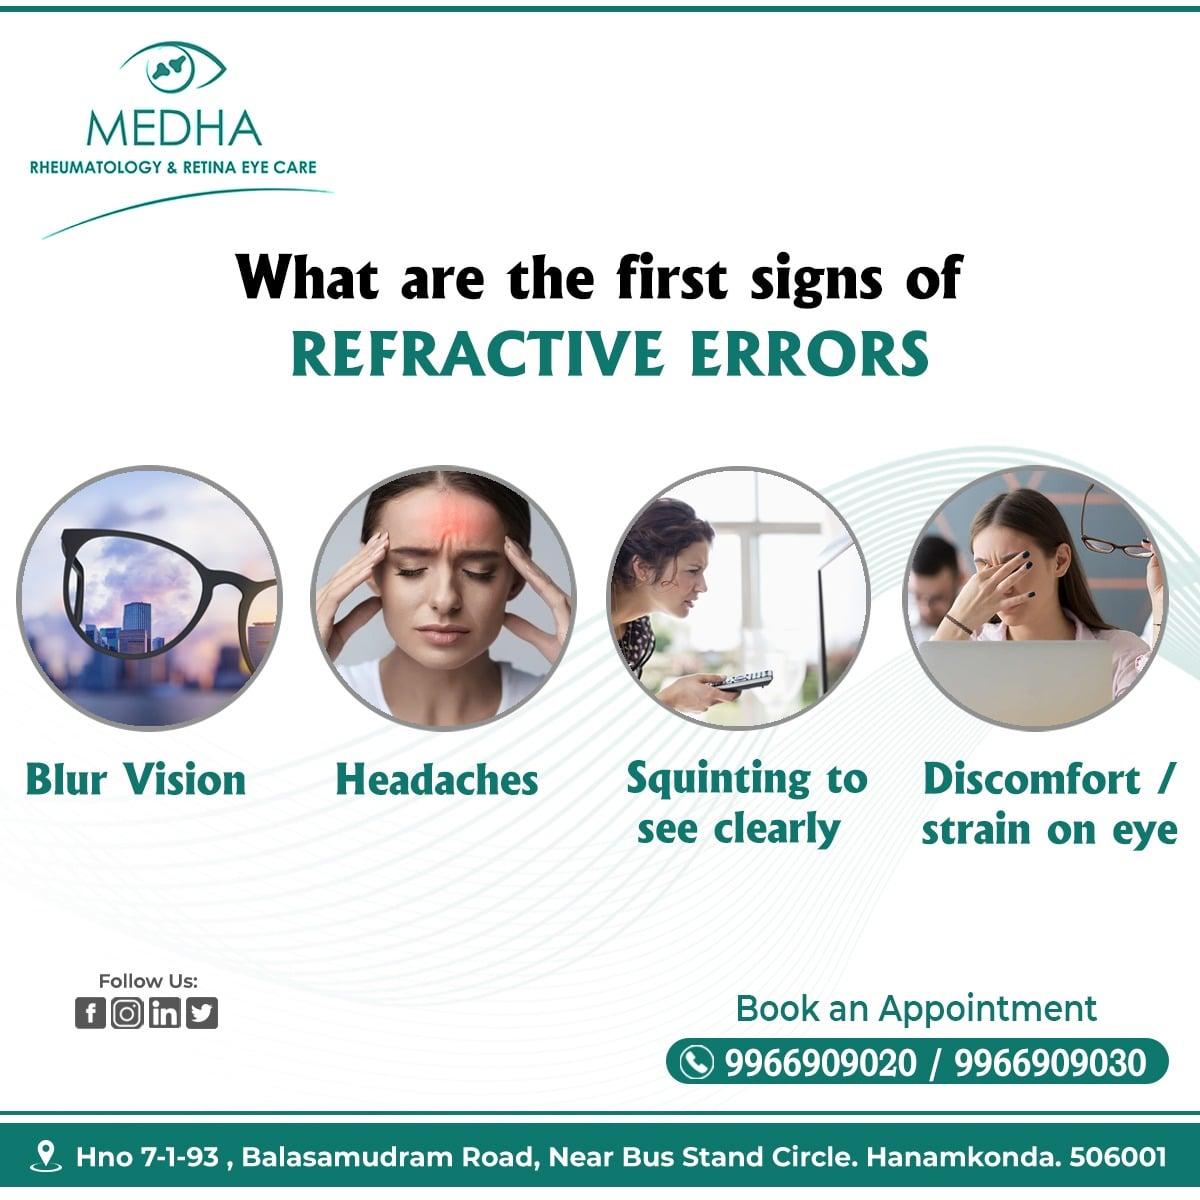 First signs of REFRACTIVE ERRORS...